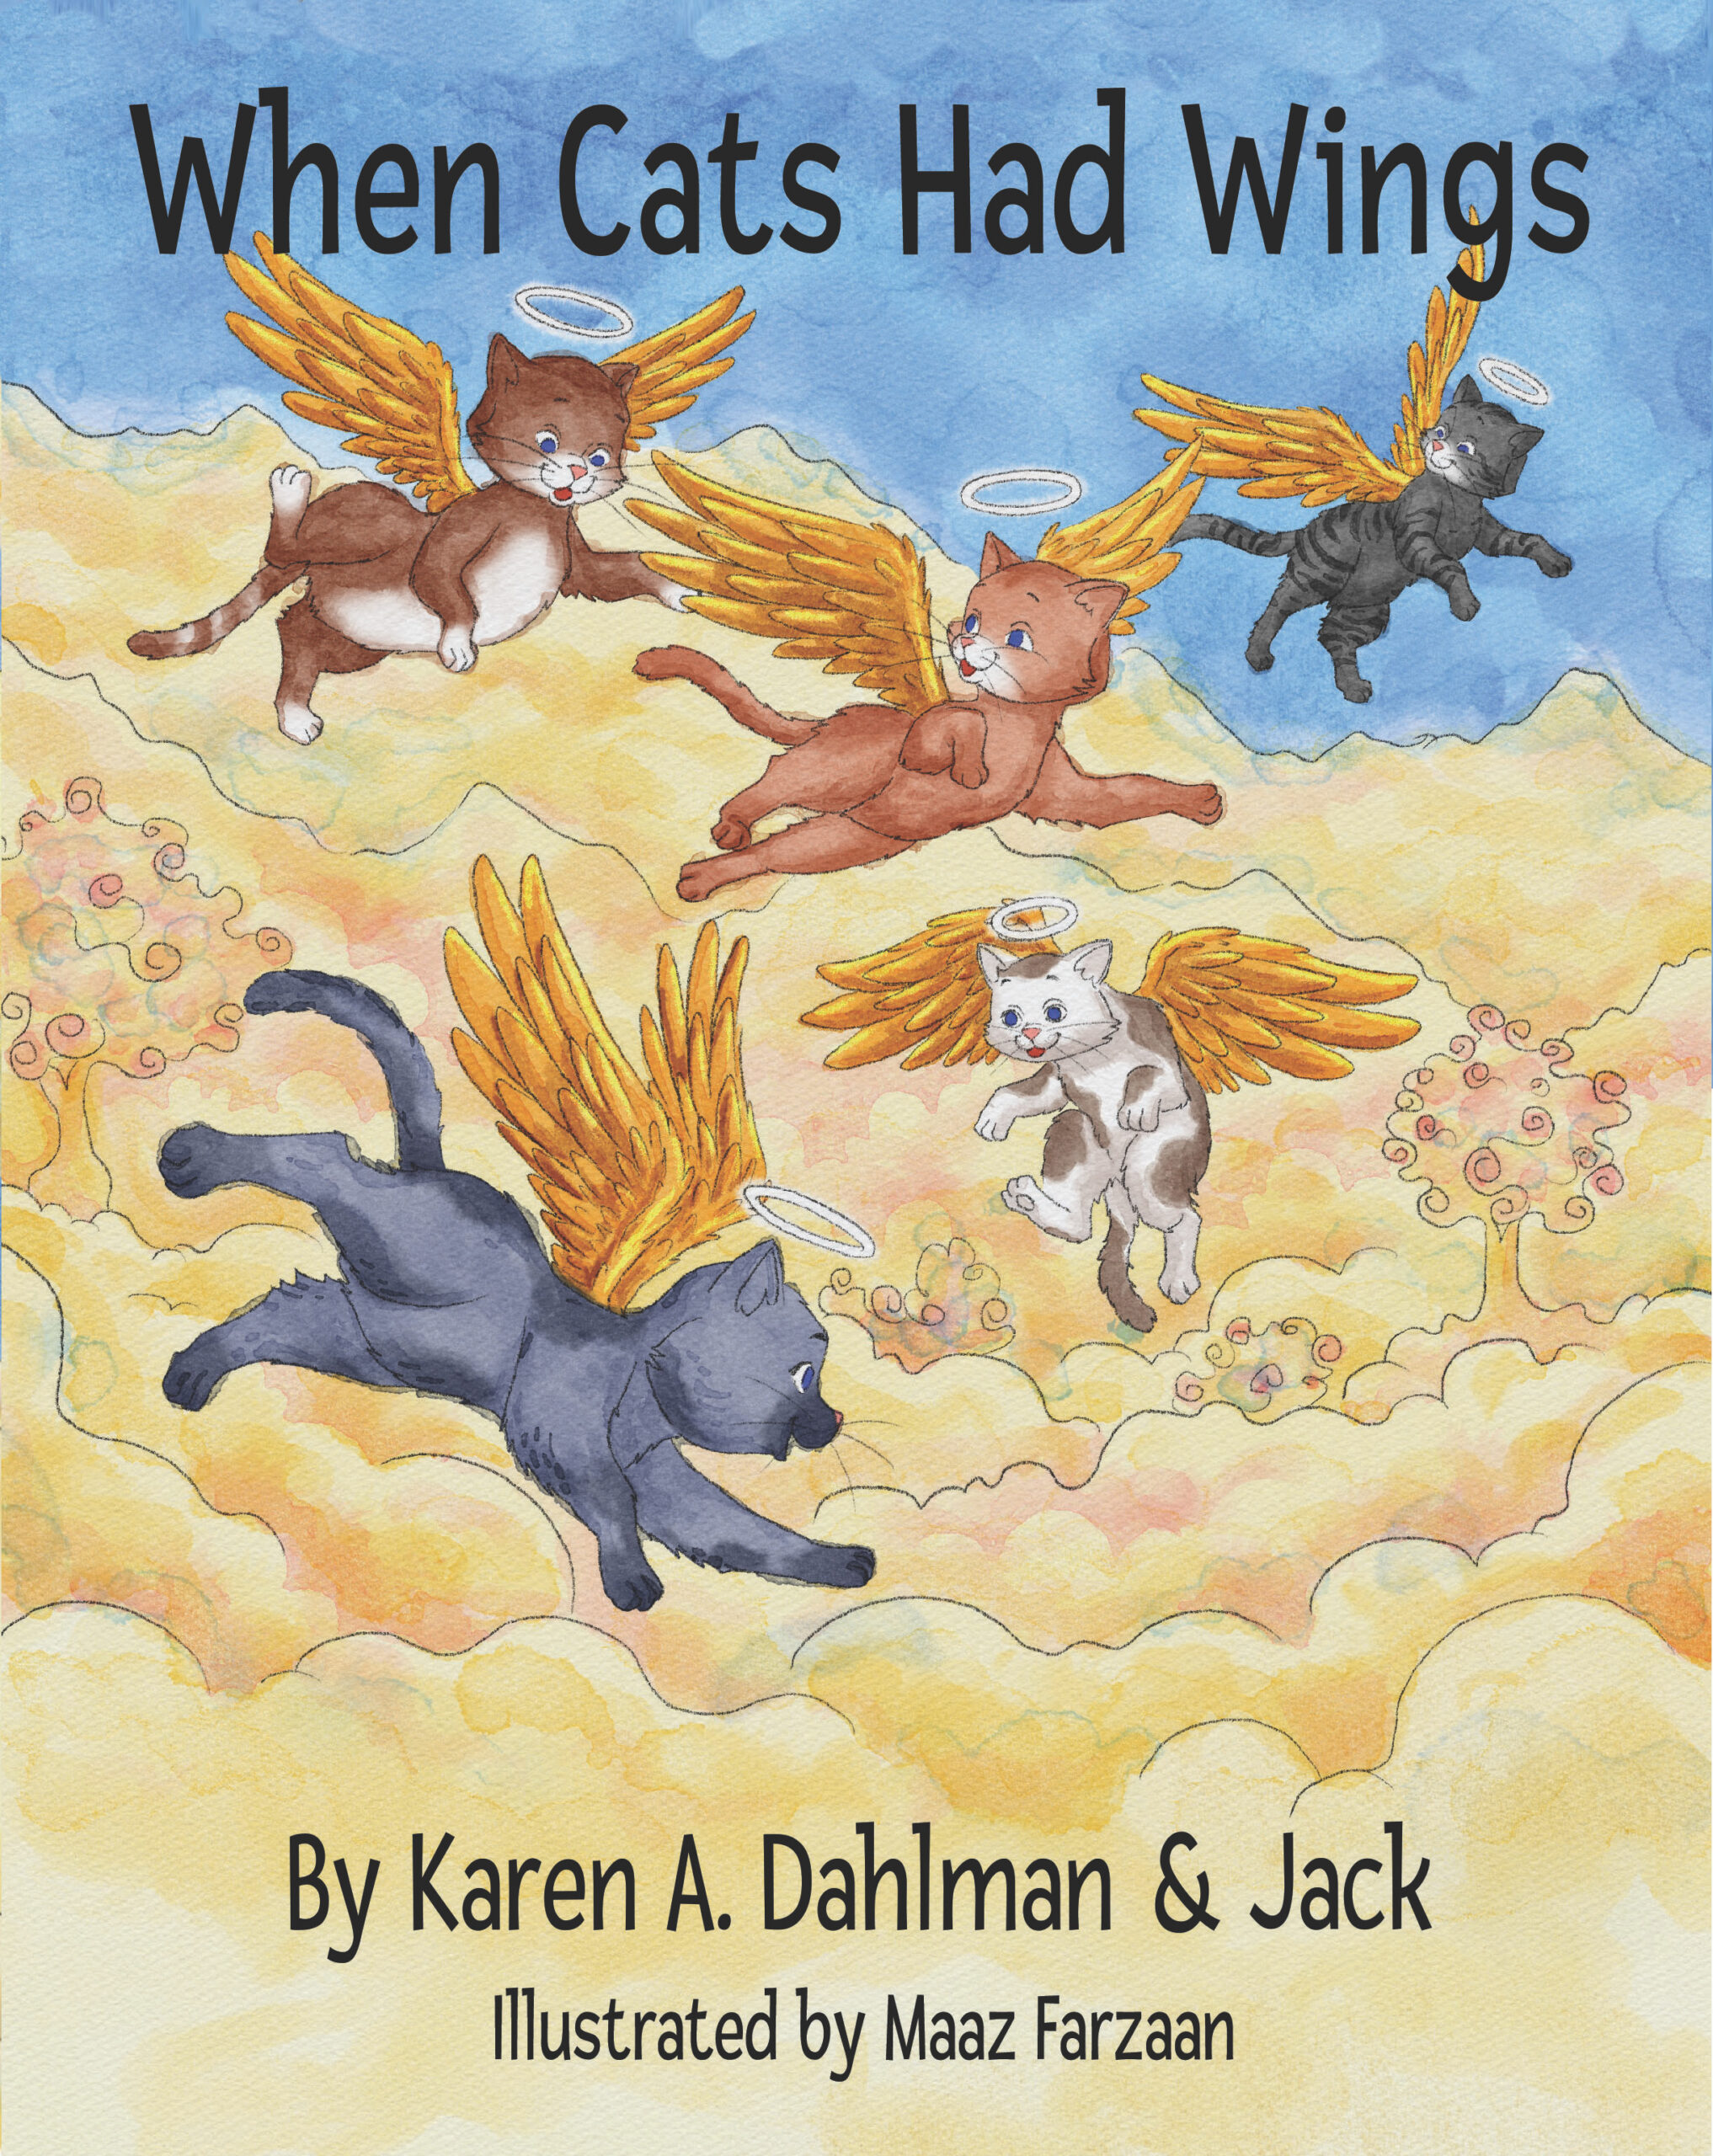 Press Release: When Cats Had Wings – Available on Amazon and Barnes & Noble